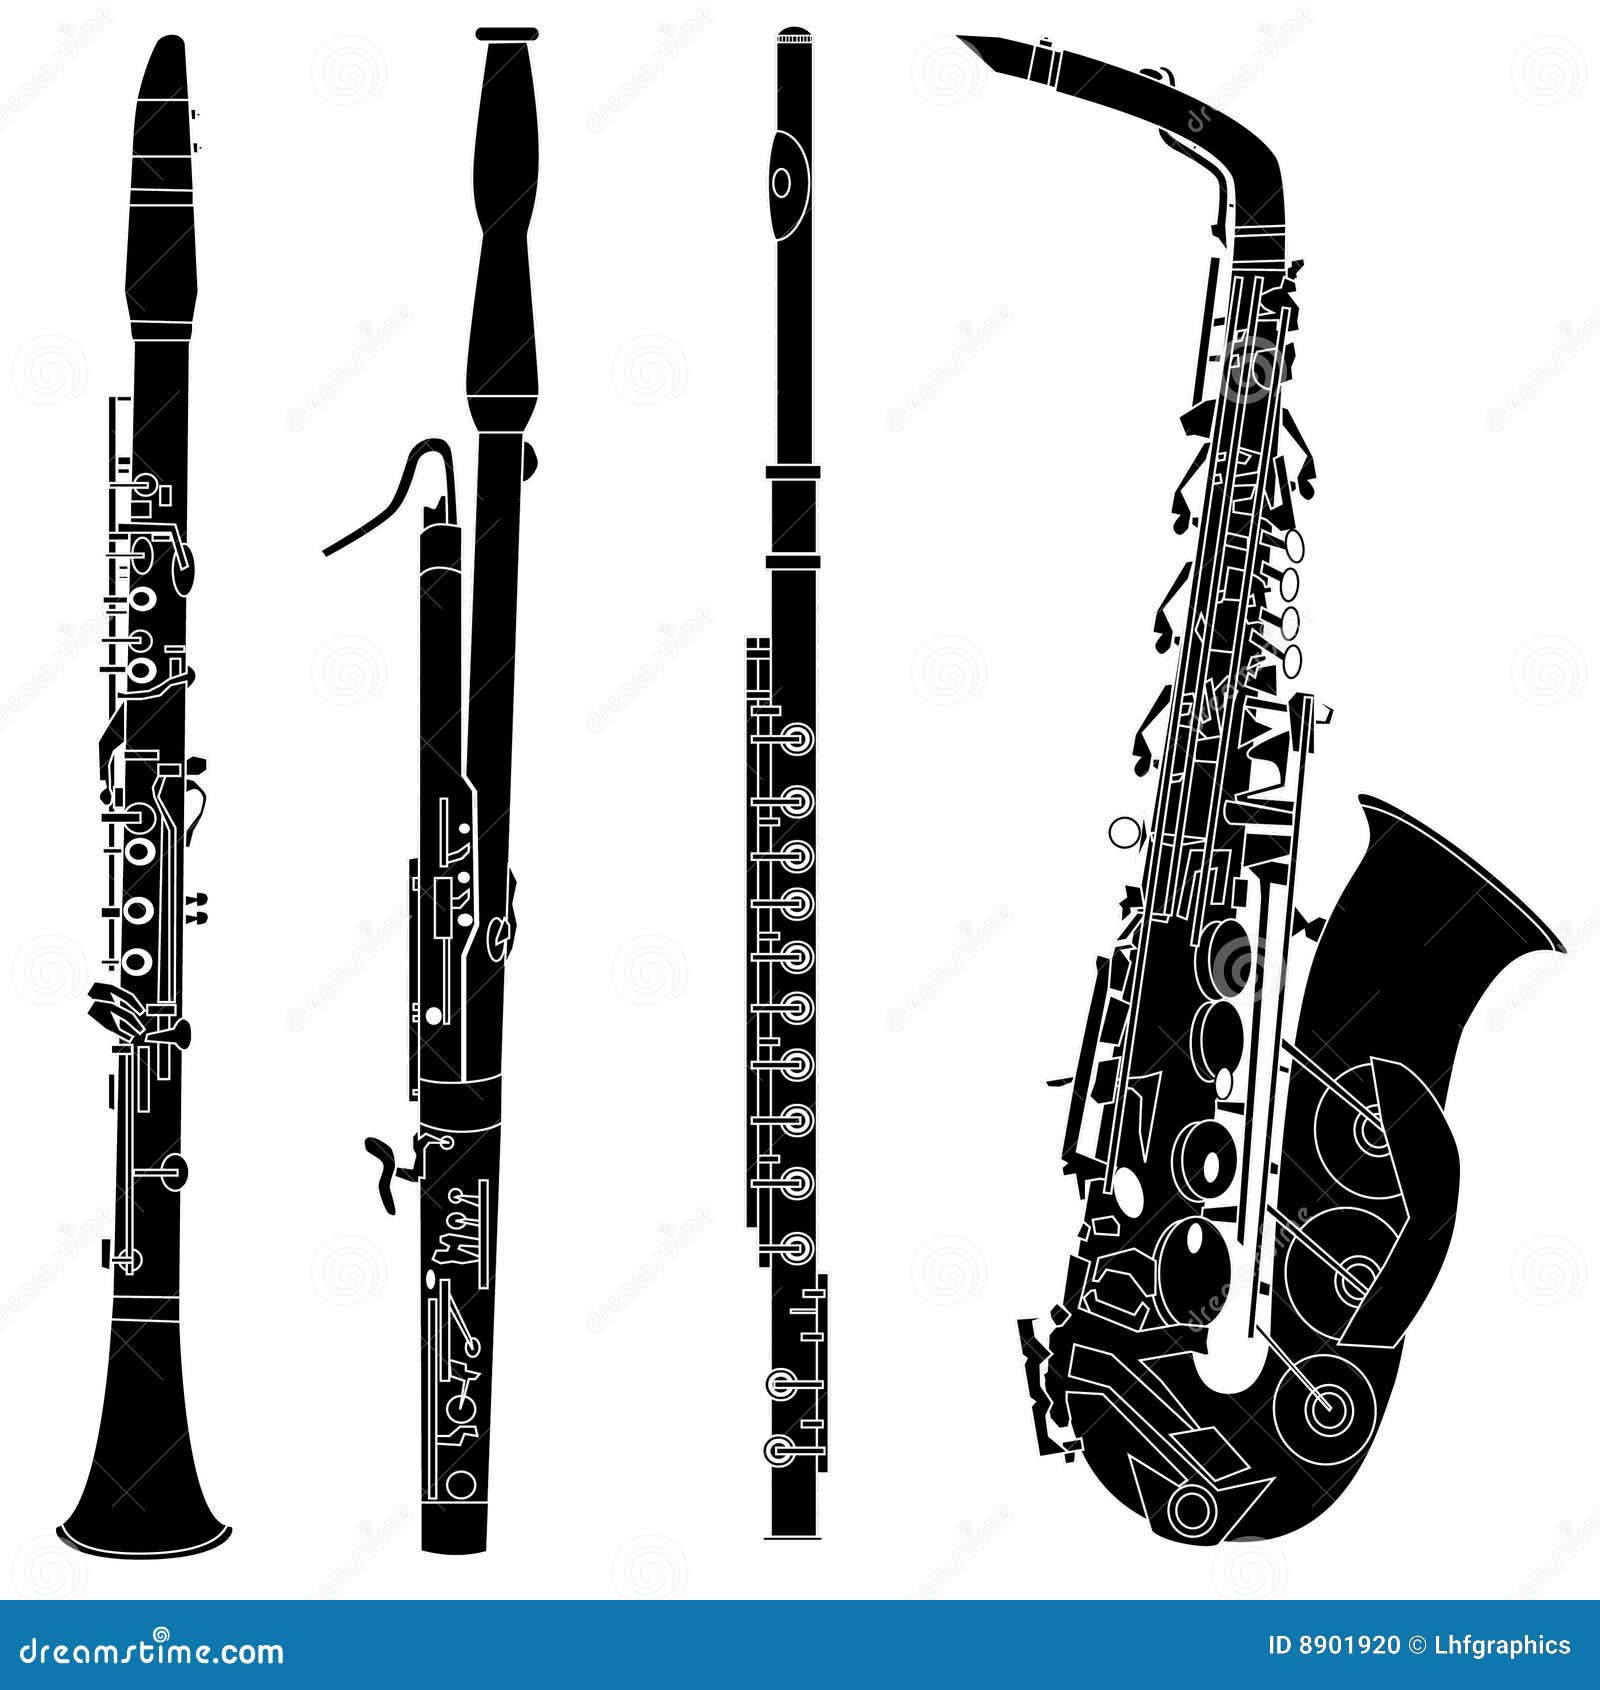 woodwind musical instruments in 